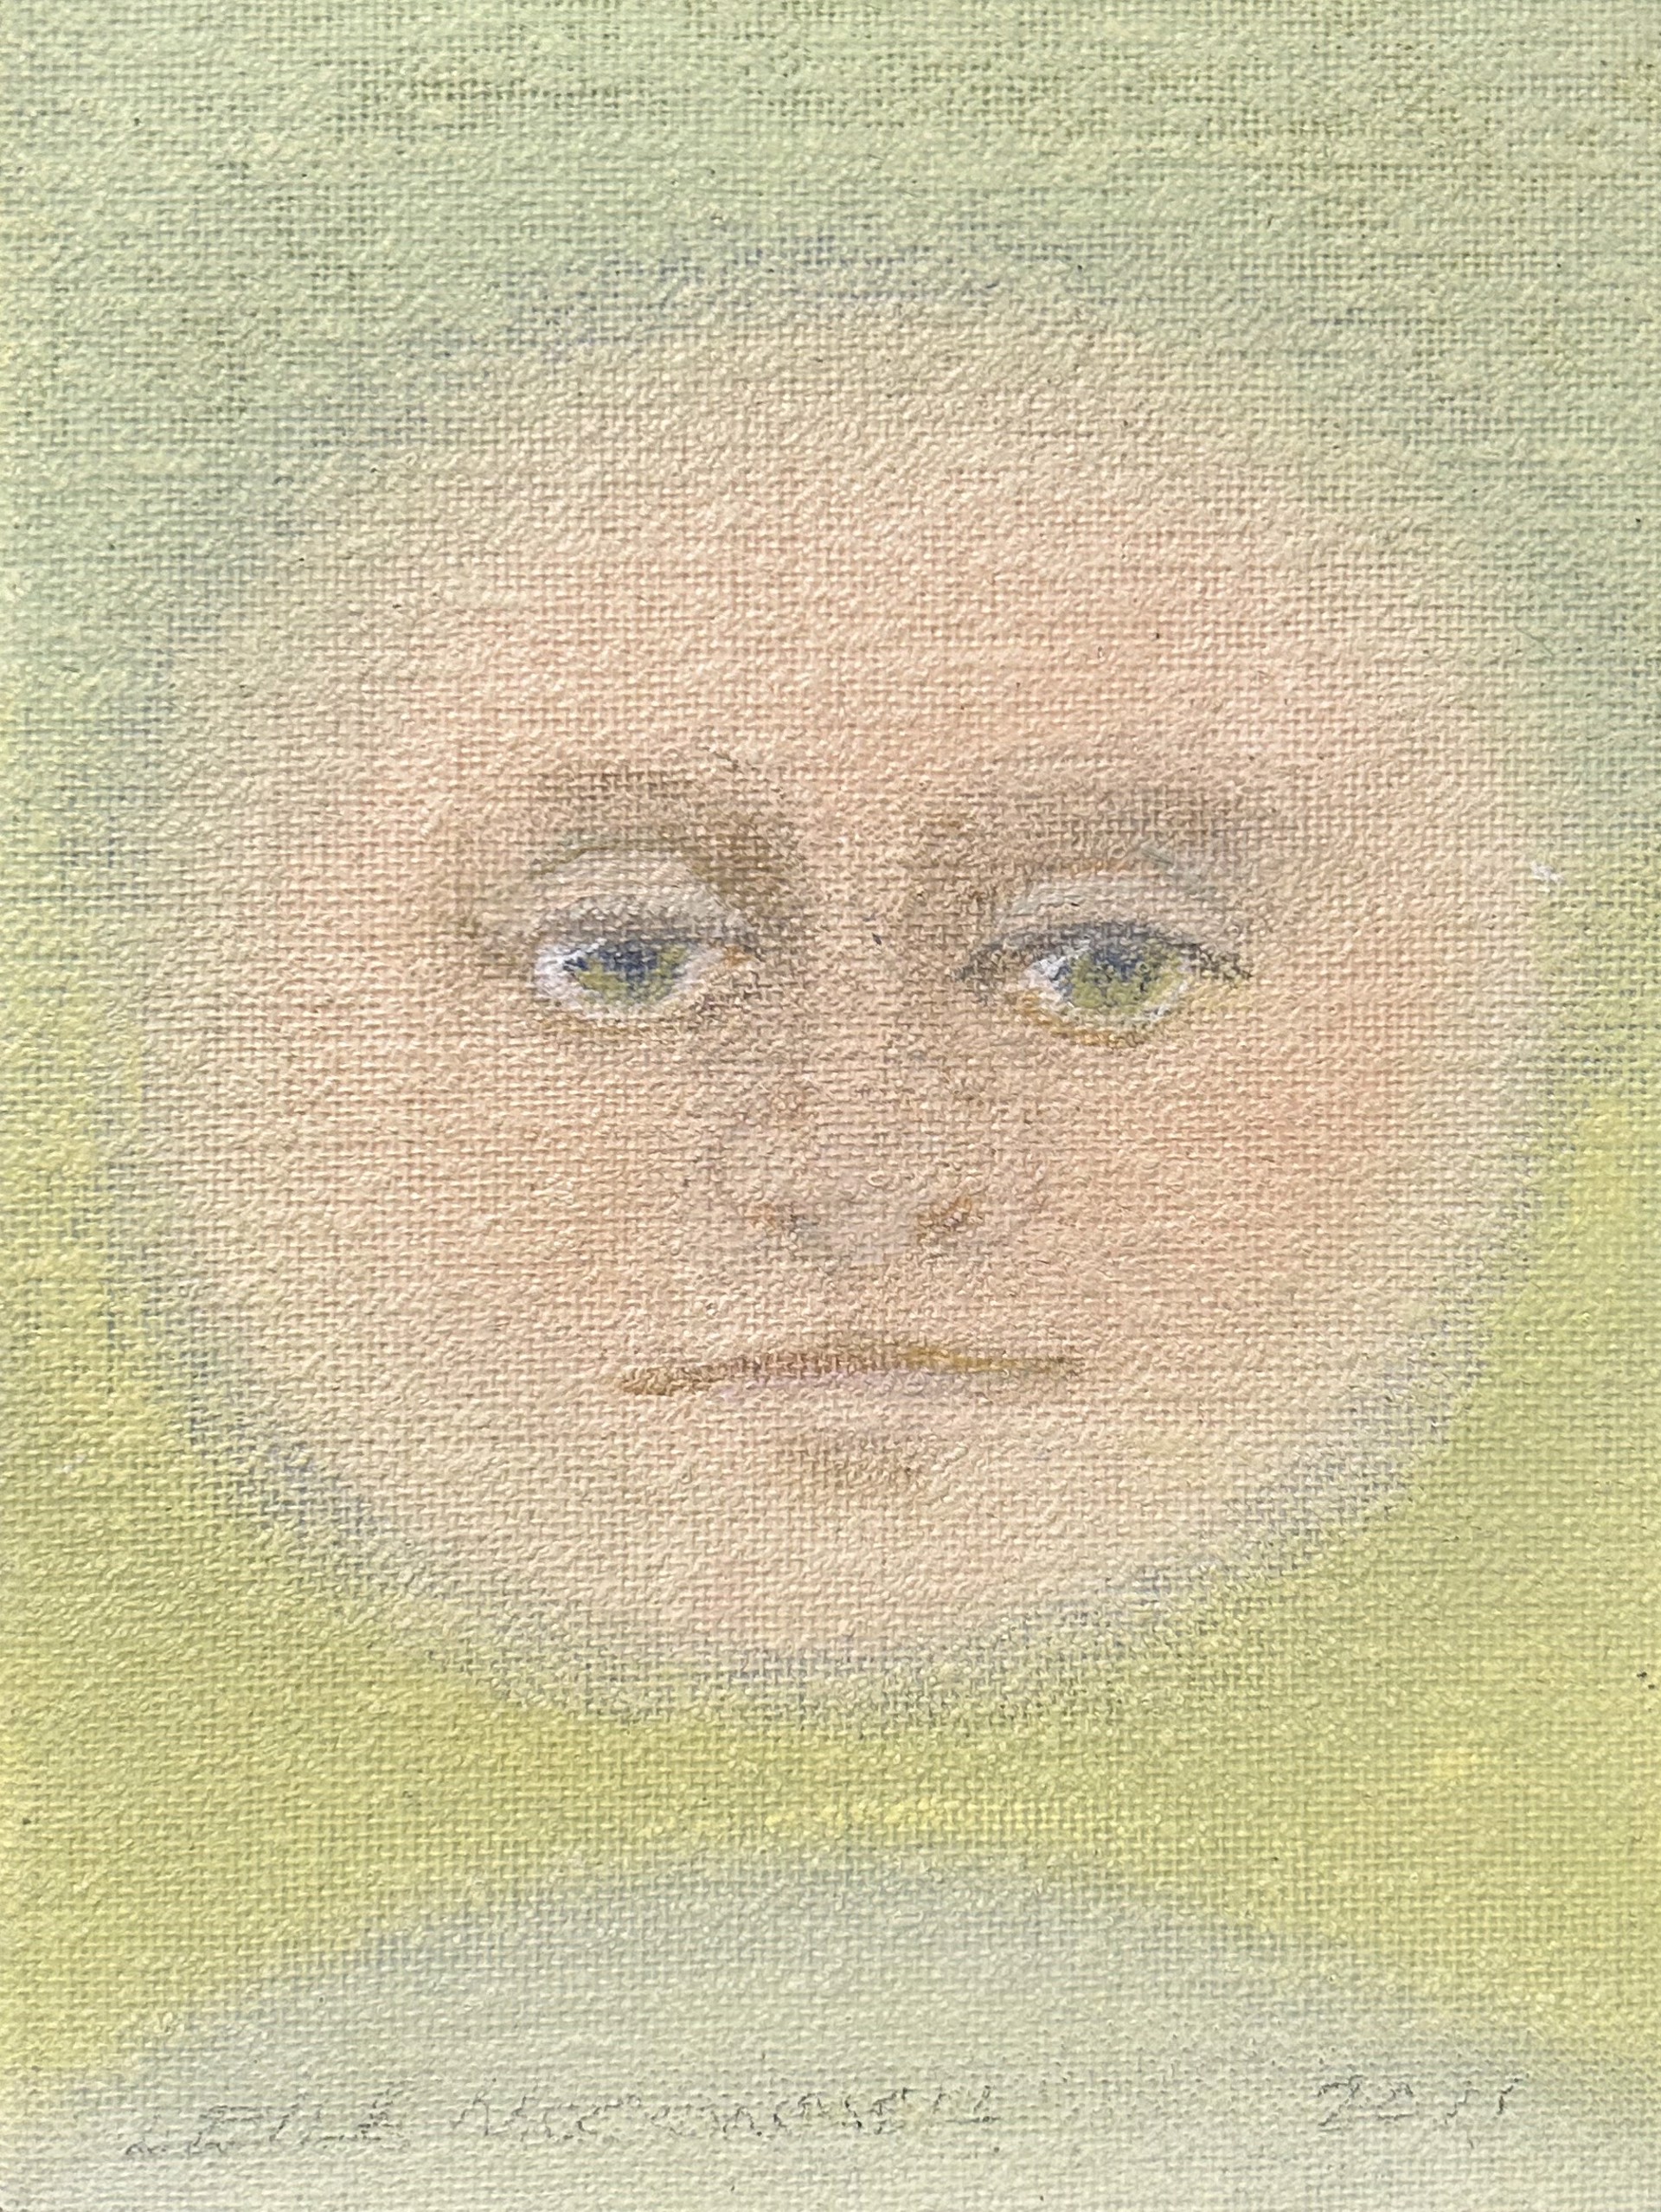 Moonface - pale pink on yellow/green by Leila McConnell